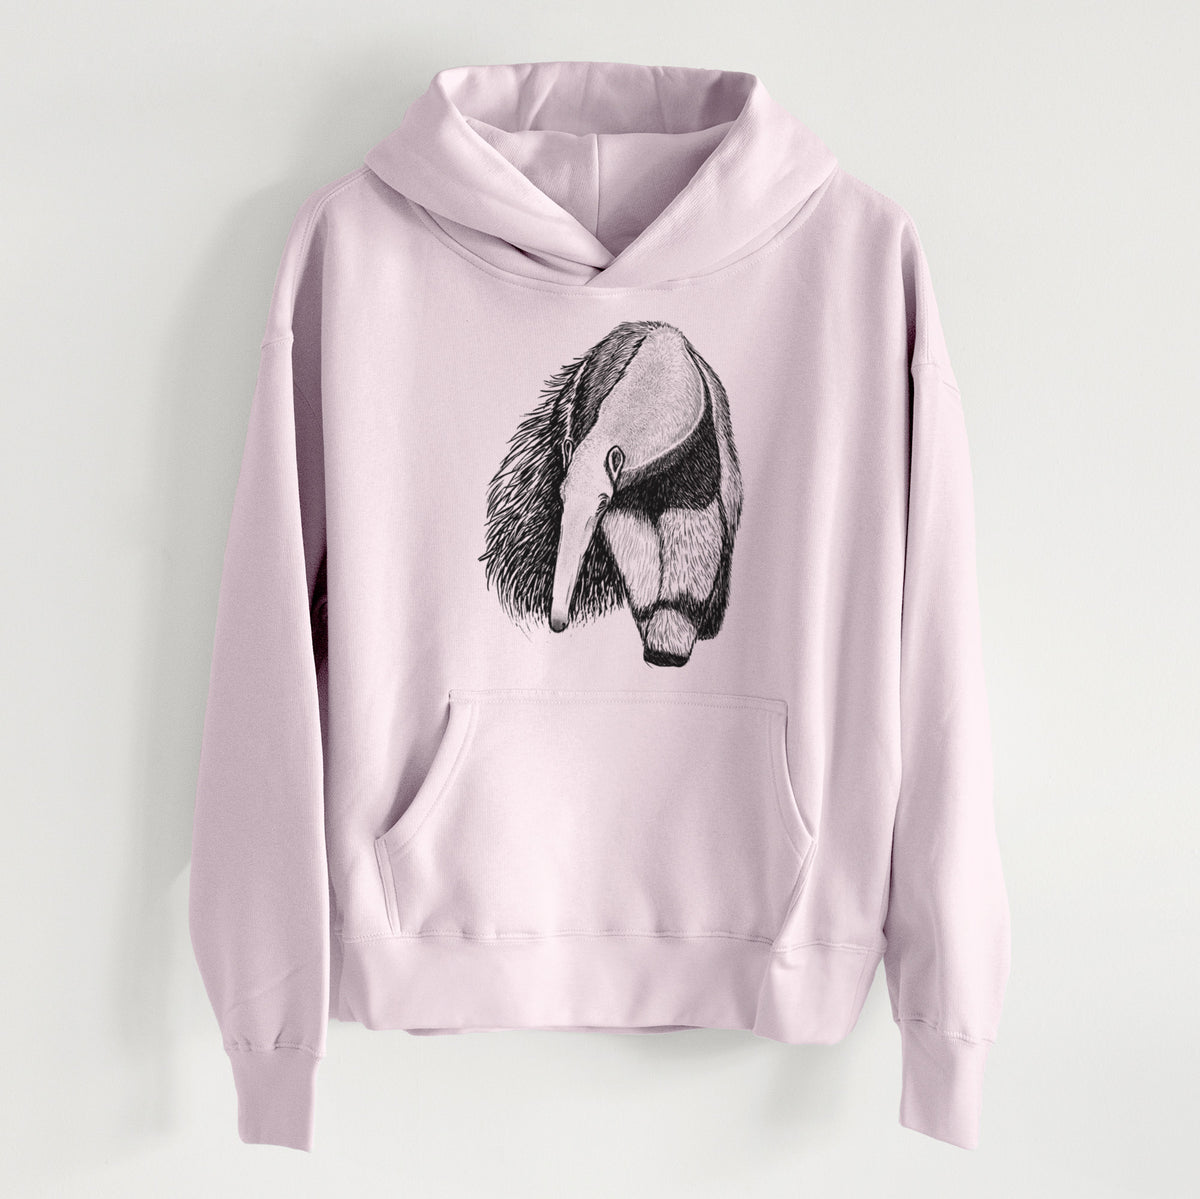 Giant Anteater - Myrmecophaga tridactyla - Women&#39;s Heavyweight Relaxed Hoodie